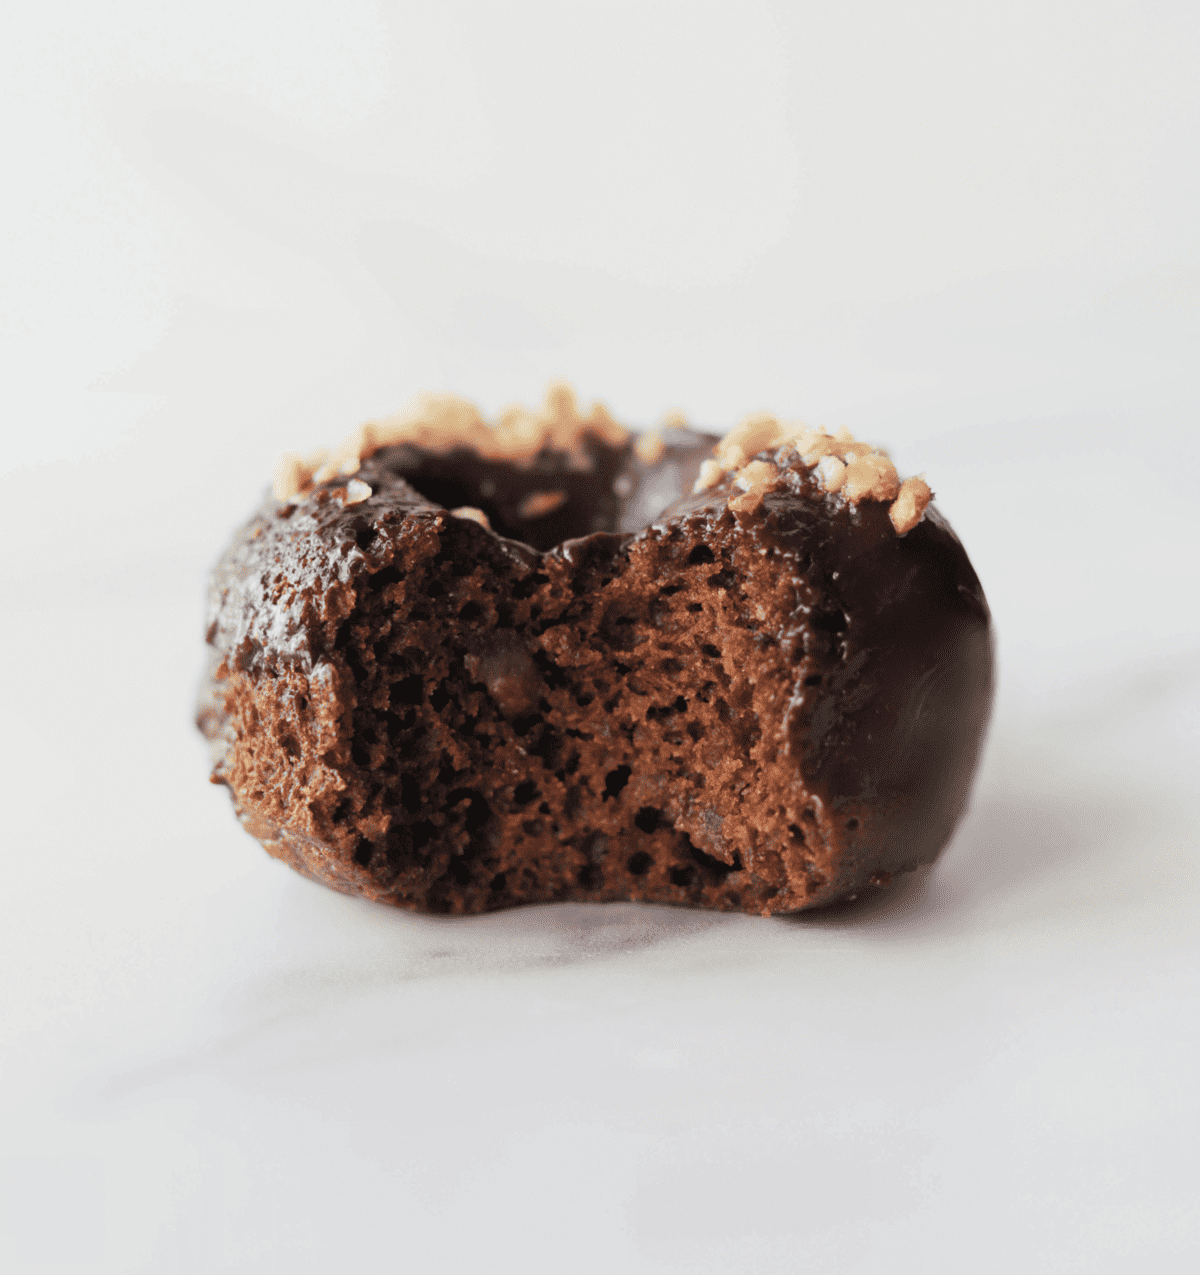 A front close up shot of a chocolate glazed donut with a bite taken out of it.